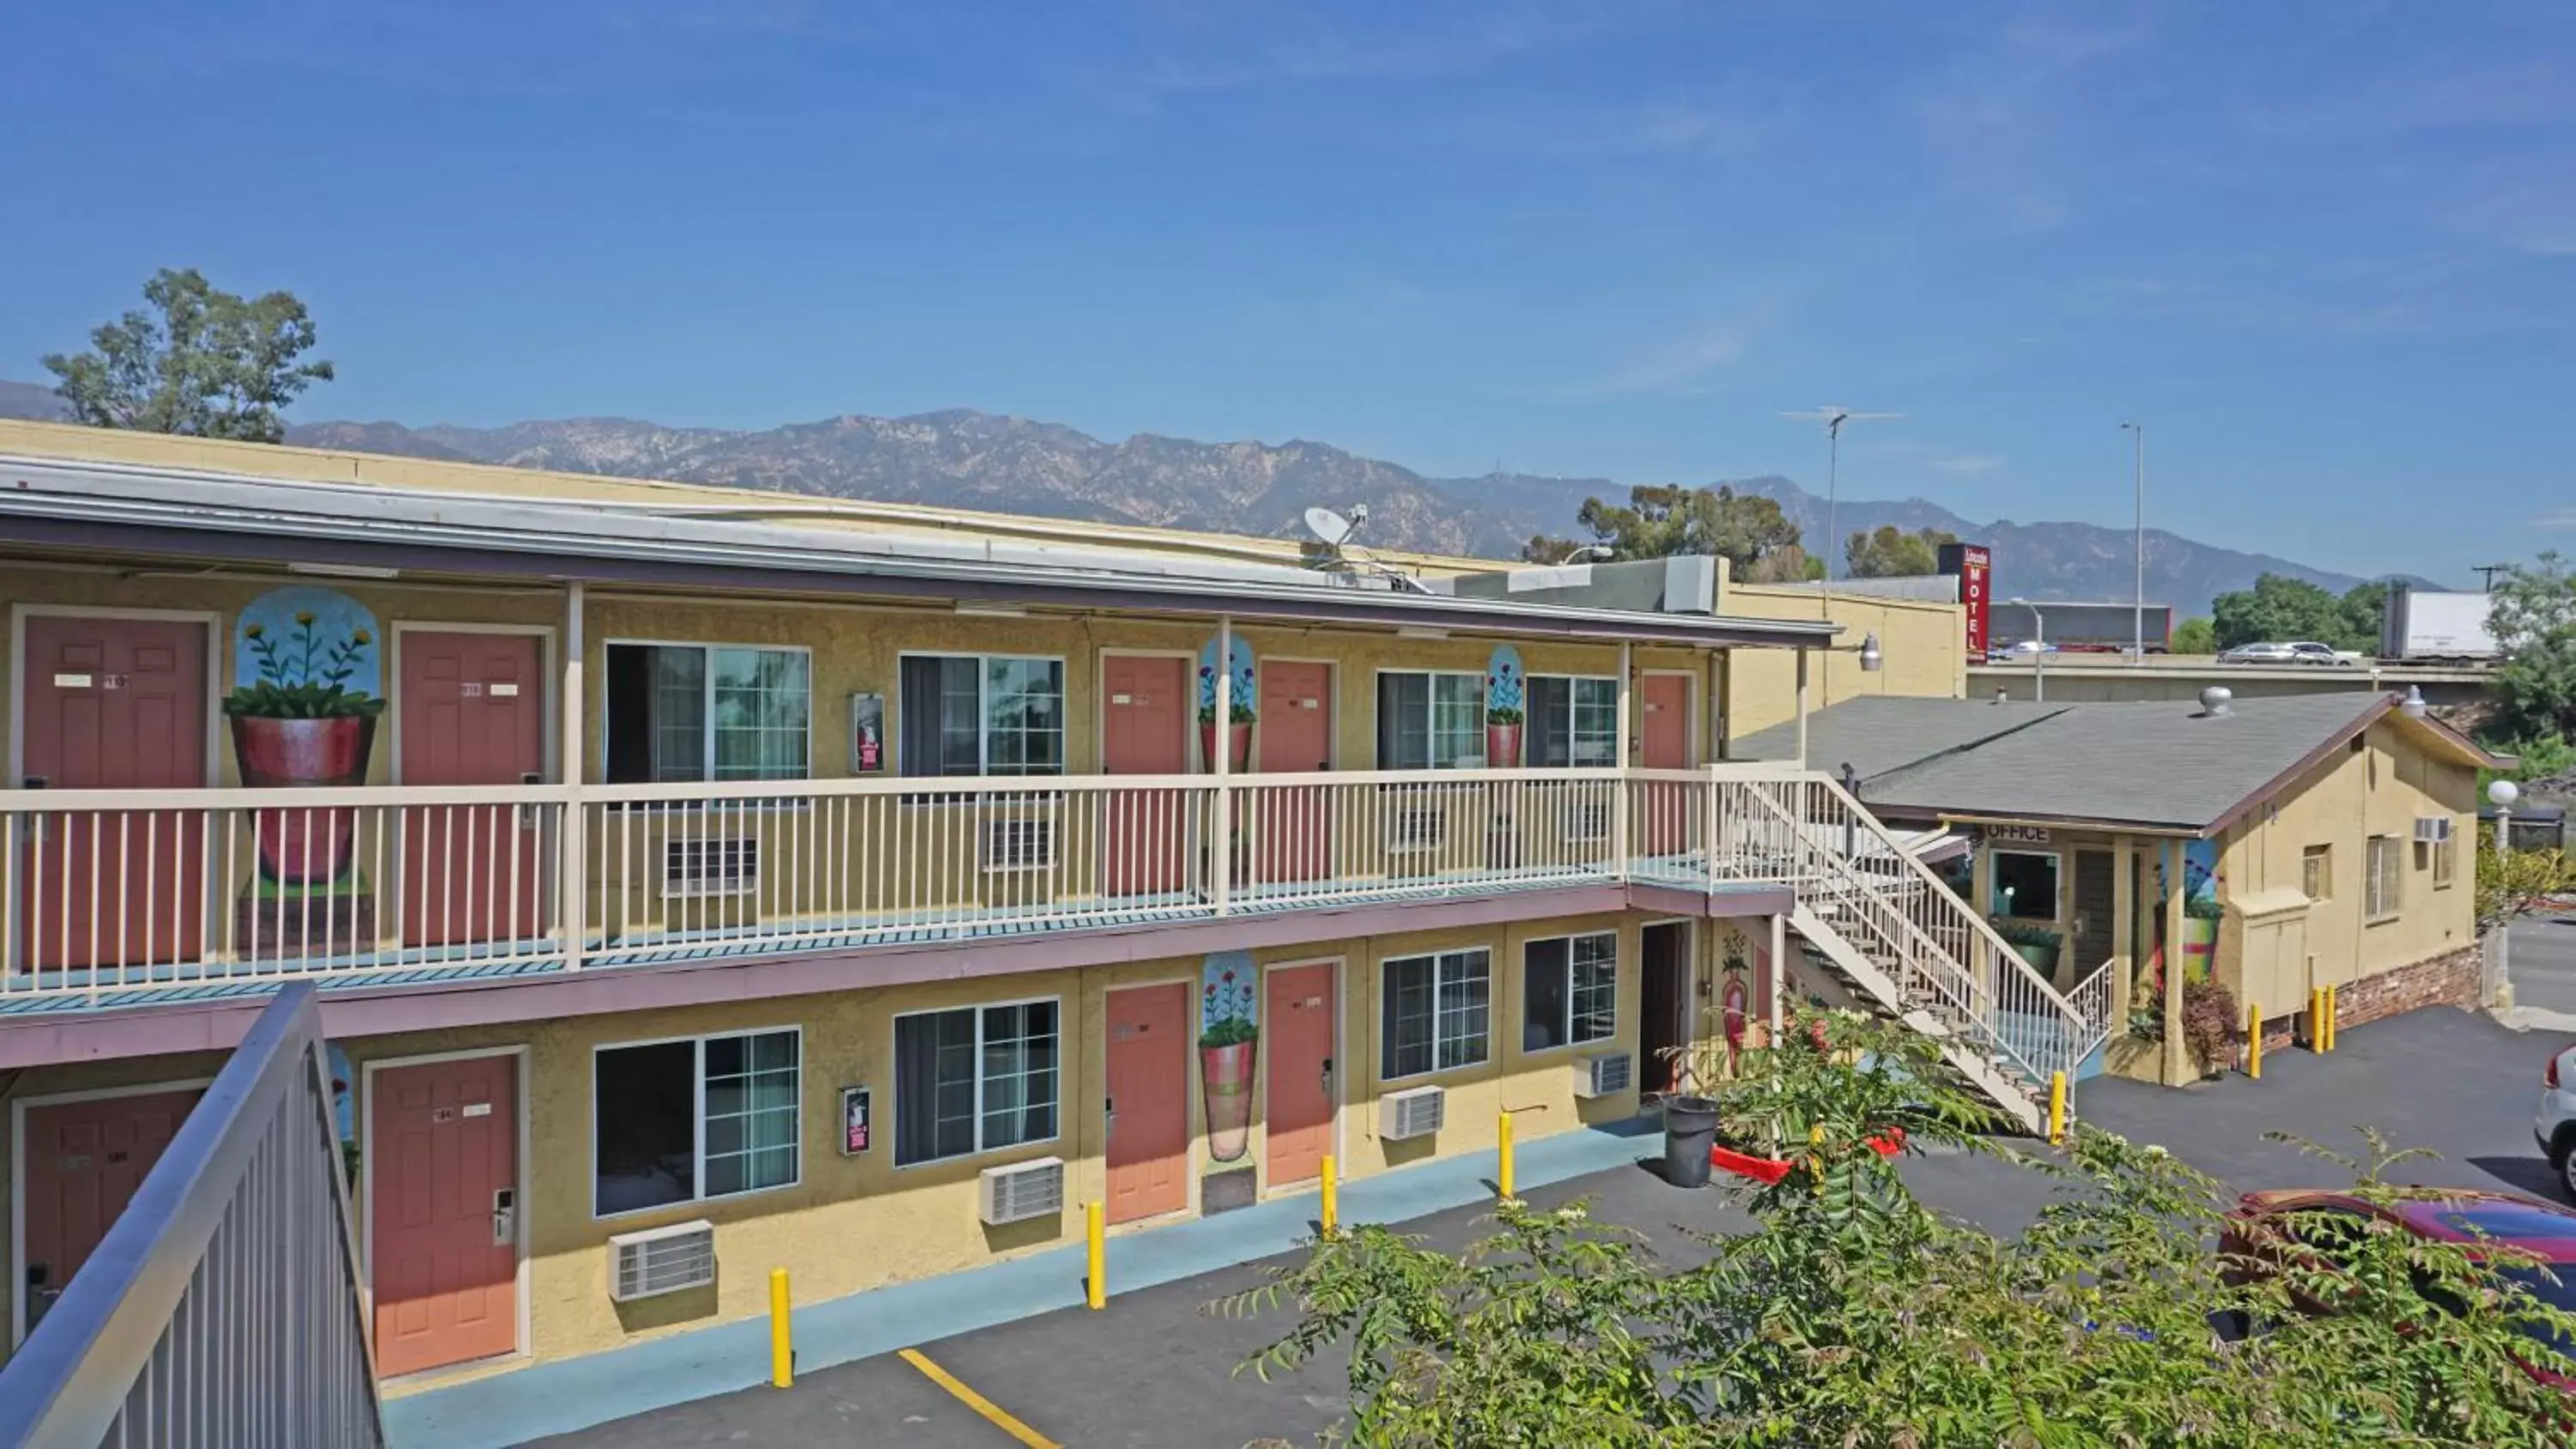 Property Building in Lincoln Motel - Los Angeles, Hollywood Area